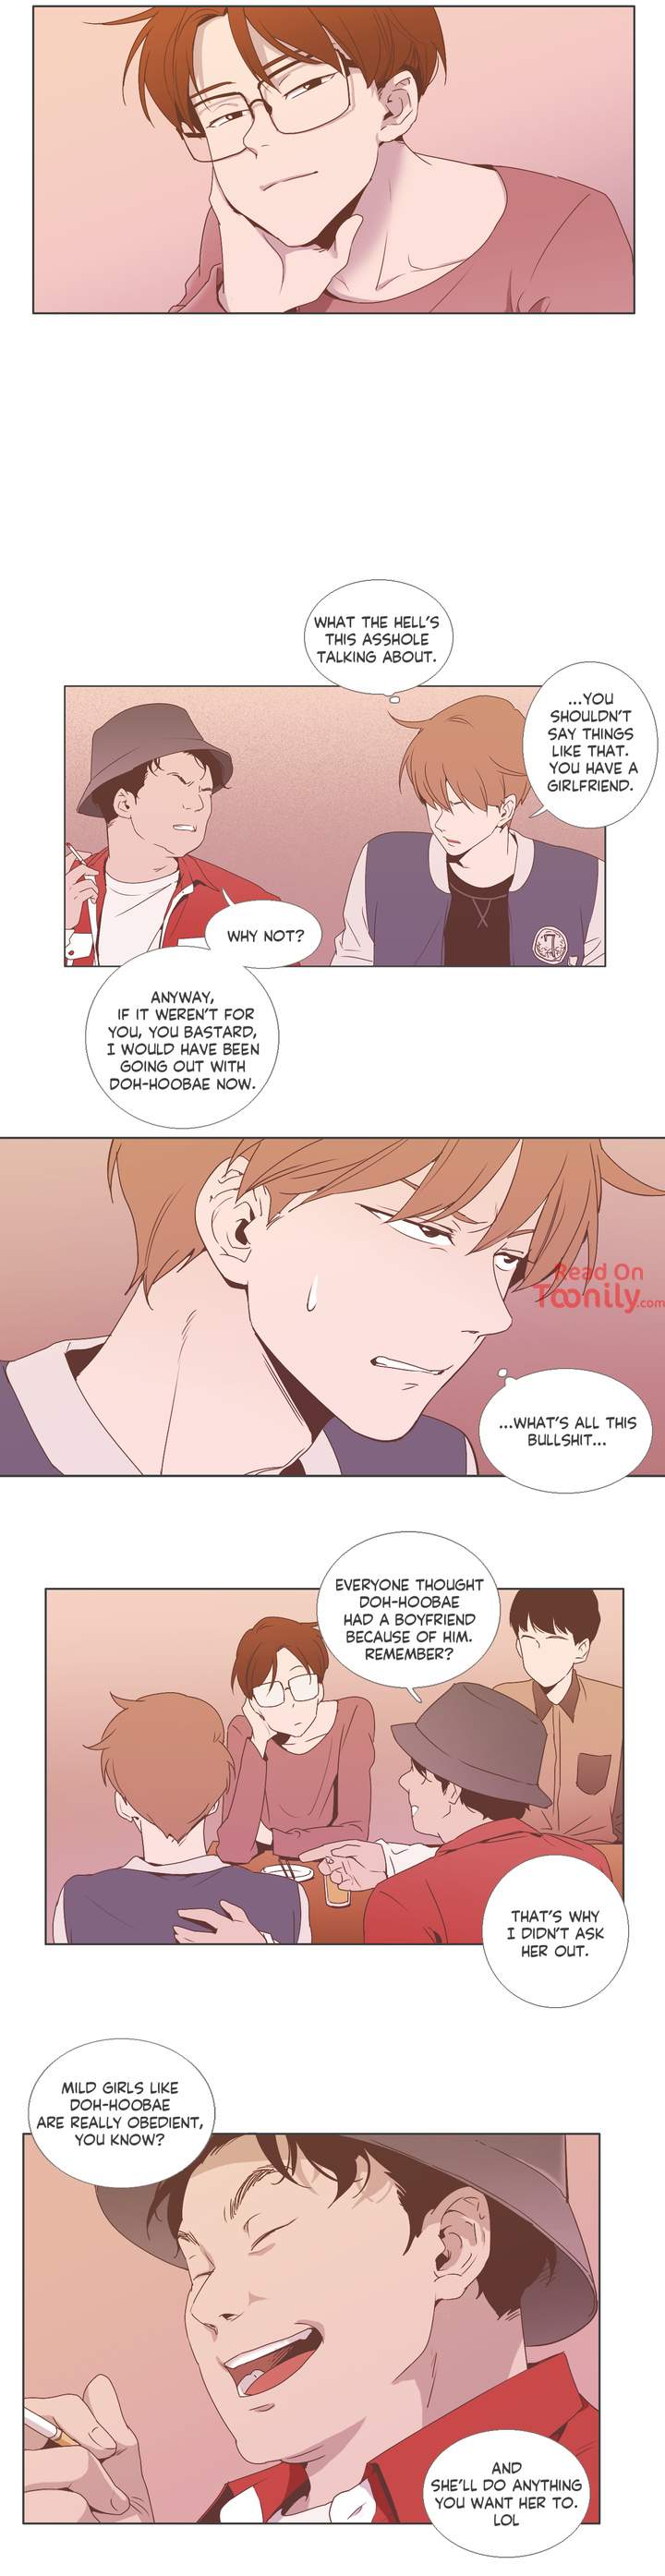 Something About Us - Chapter 9 Page 8